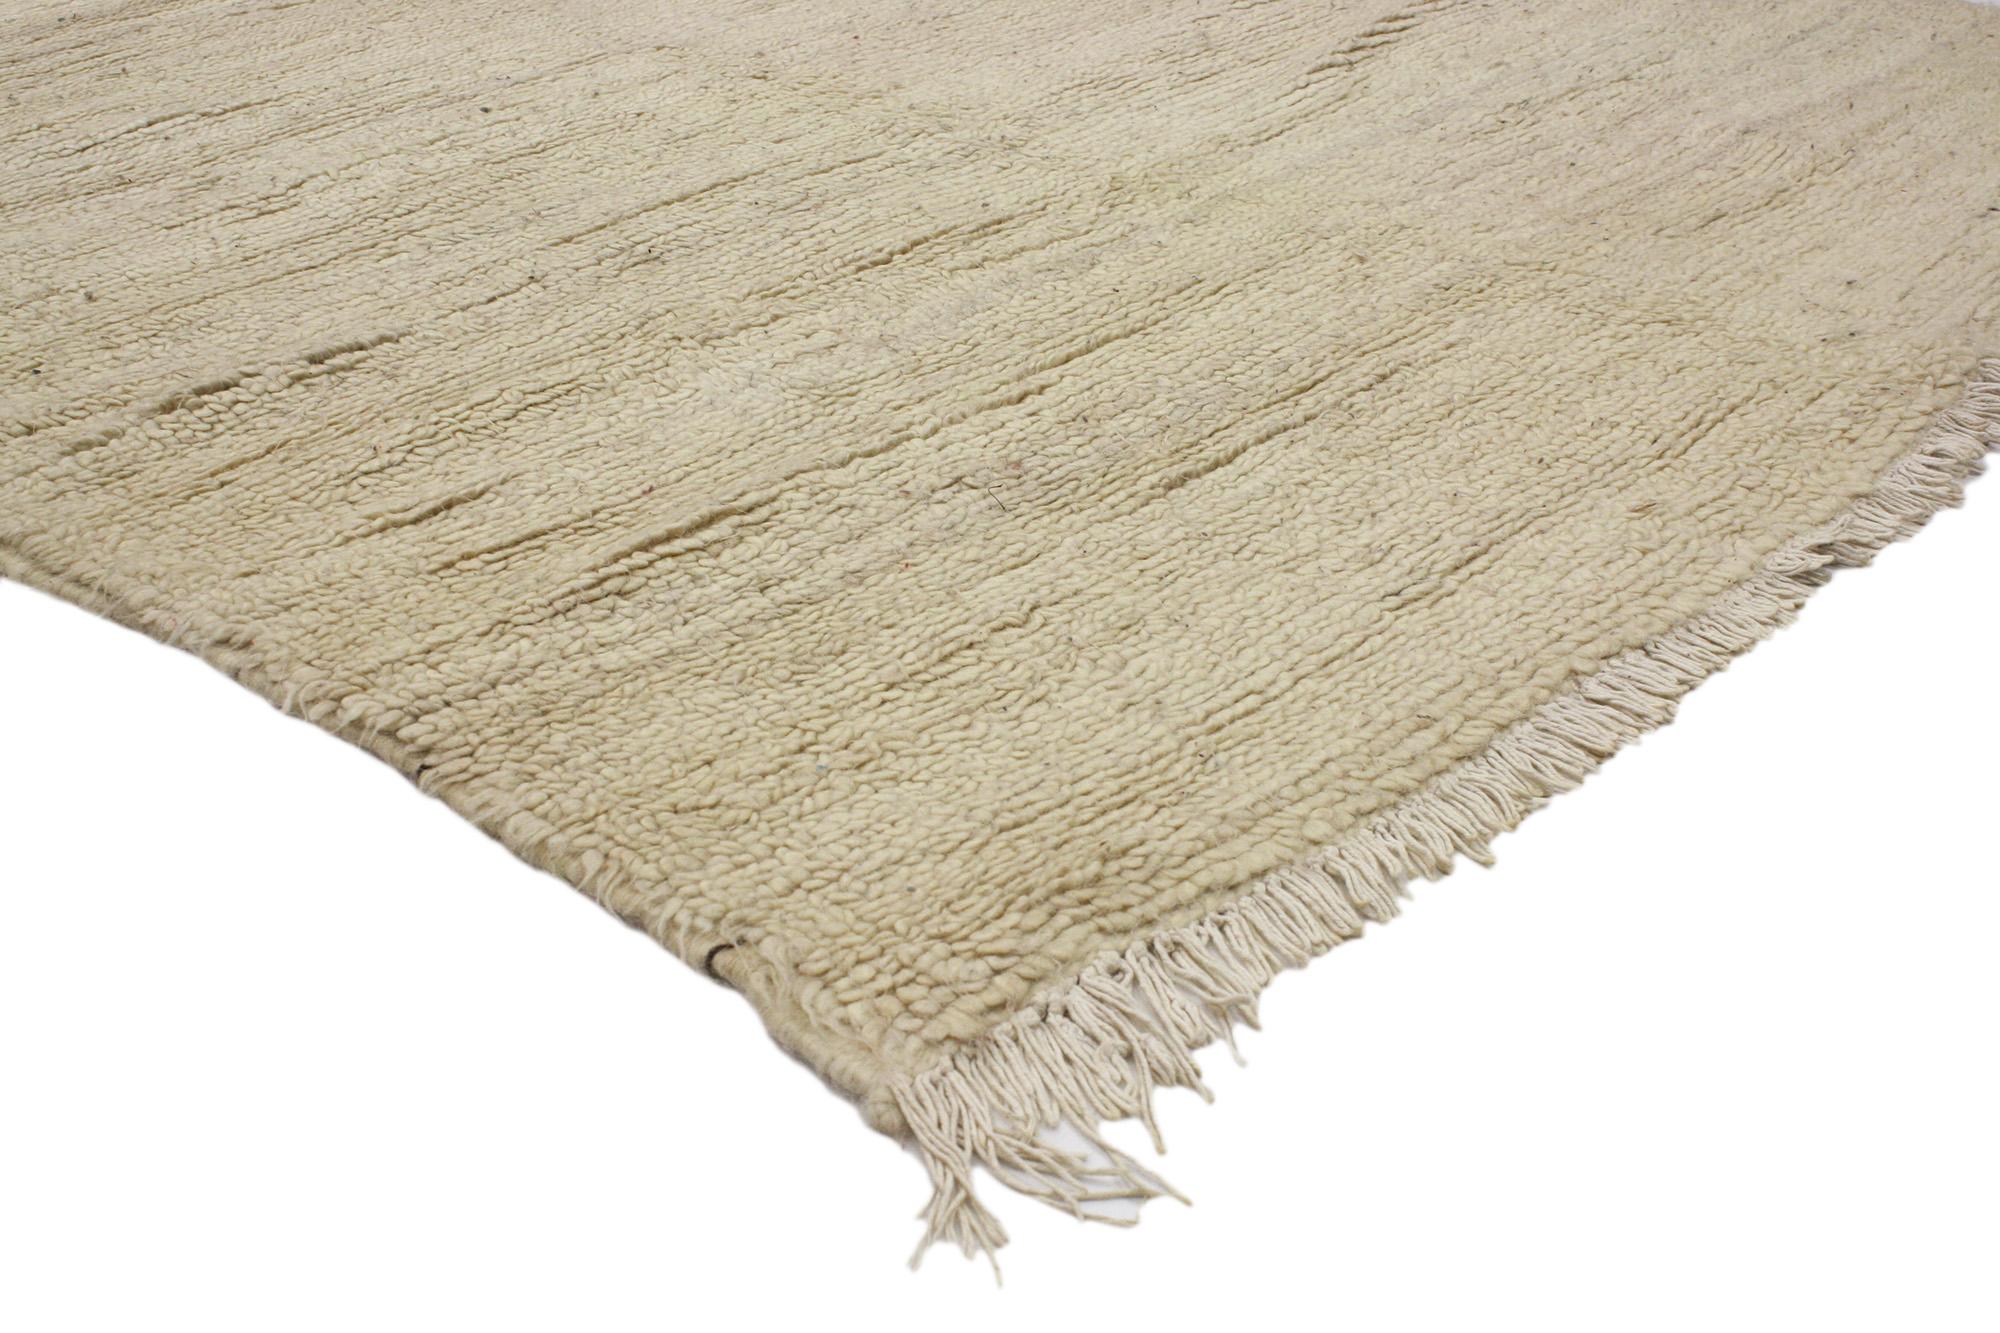 20161 Vintage Berber Moroccan Rug, 05’03 x 07’08.
Organic Modern meets nomadic charm in this hand knotted wool vintage Moroccan rug. Emanating simplicity and minimalism, this neutral Moroccan rug provides a feeling of cozy contentment without the